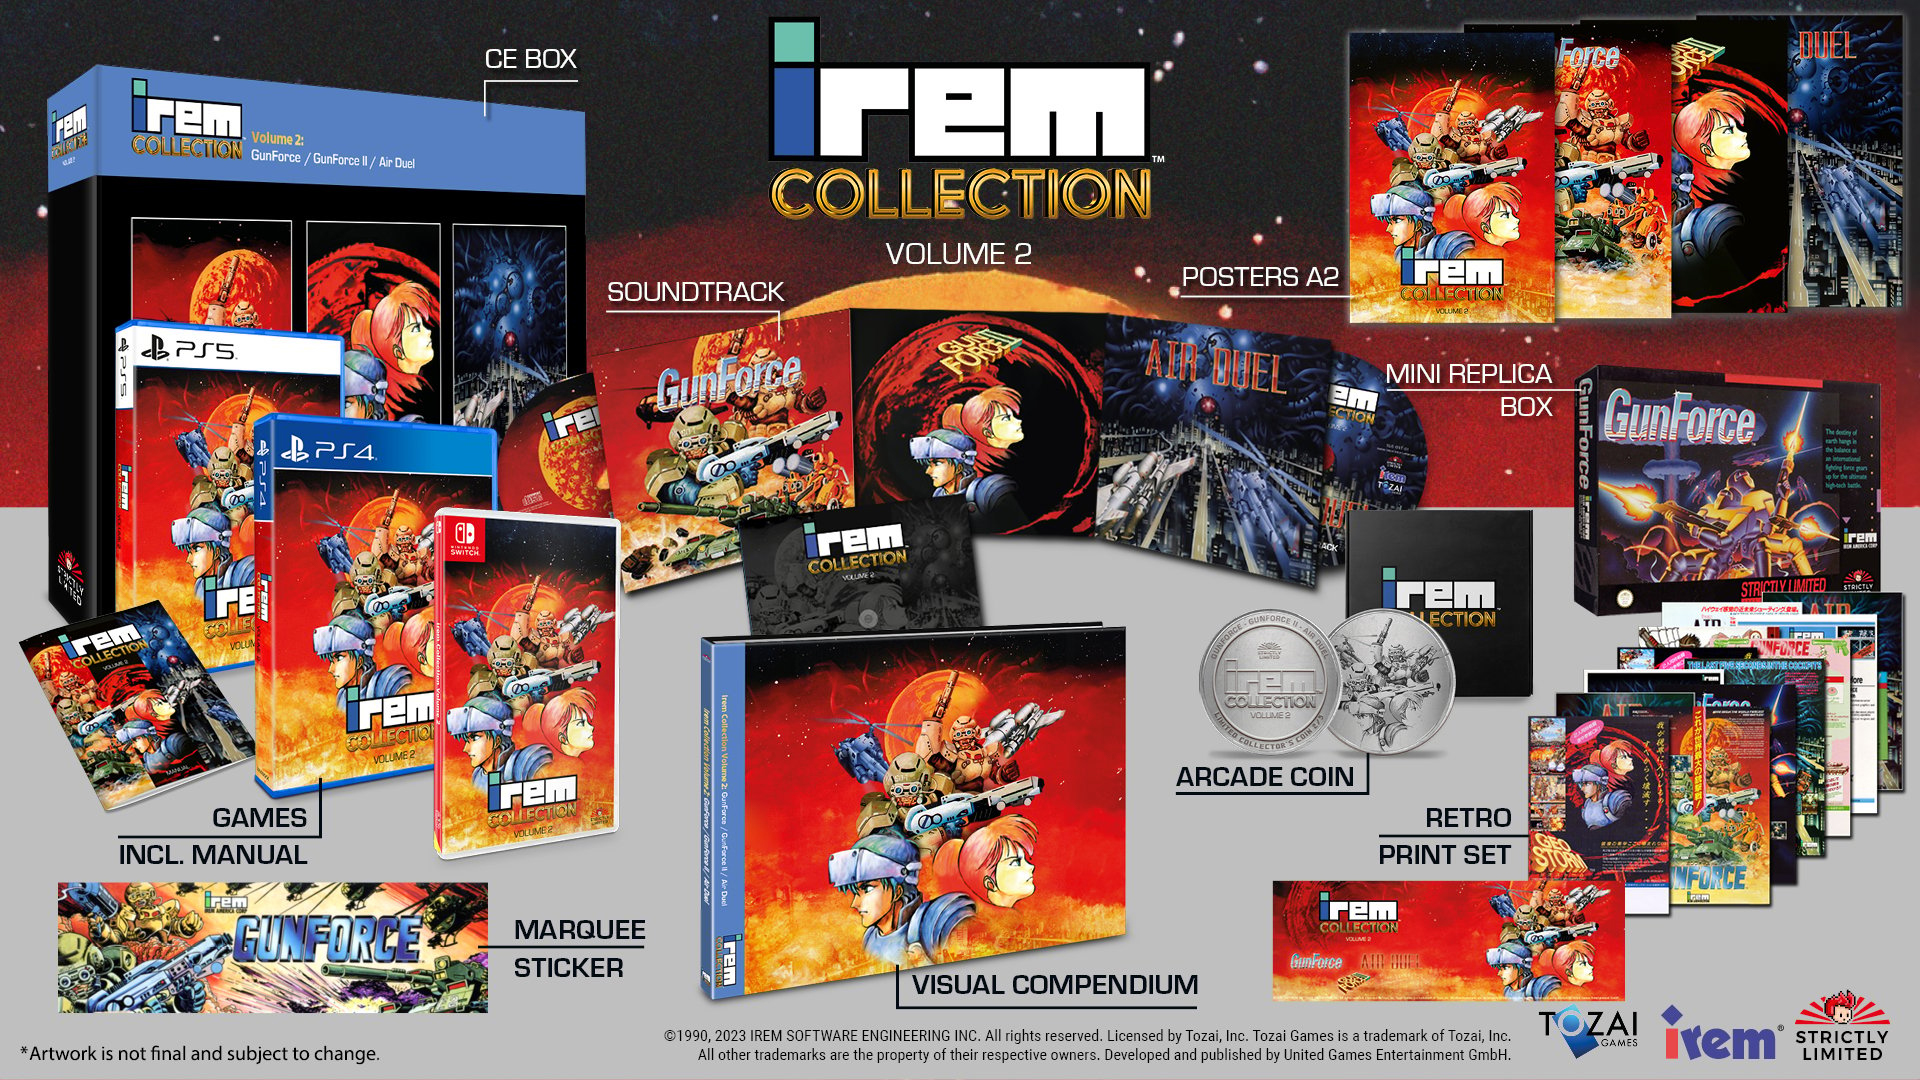 irem Collection Volume 2 - Physical edition lovers on PlayStation and Switch can pre-order theirs from July 16, only at Strictly Limited Games